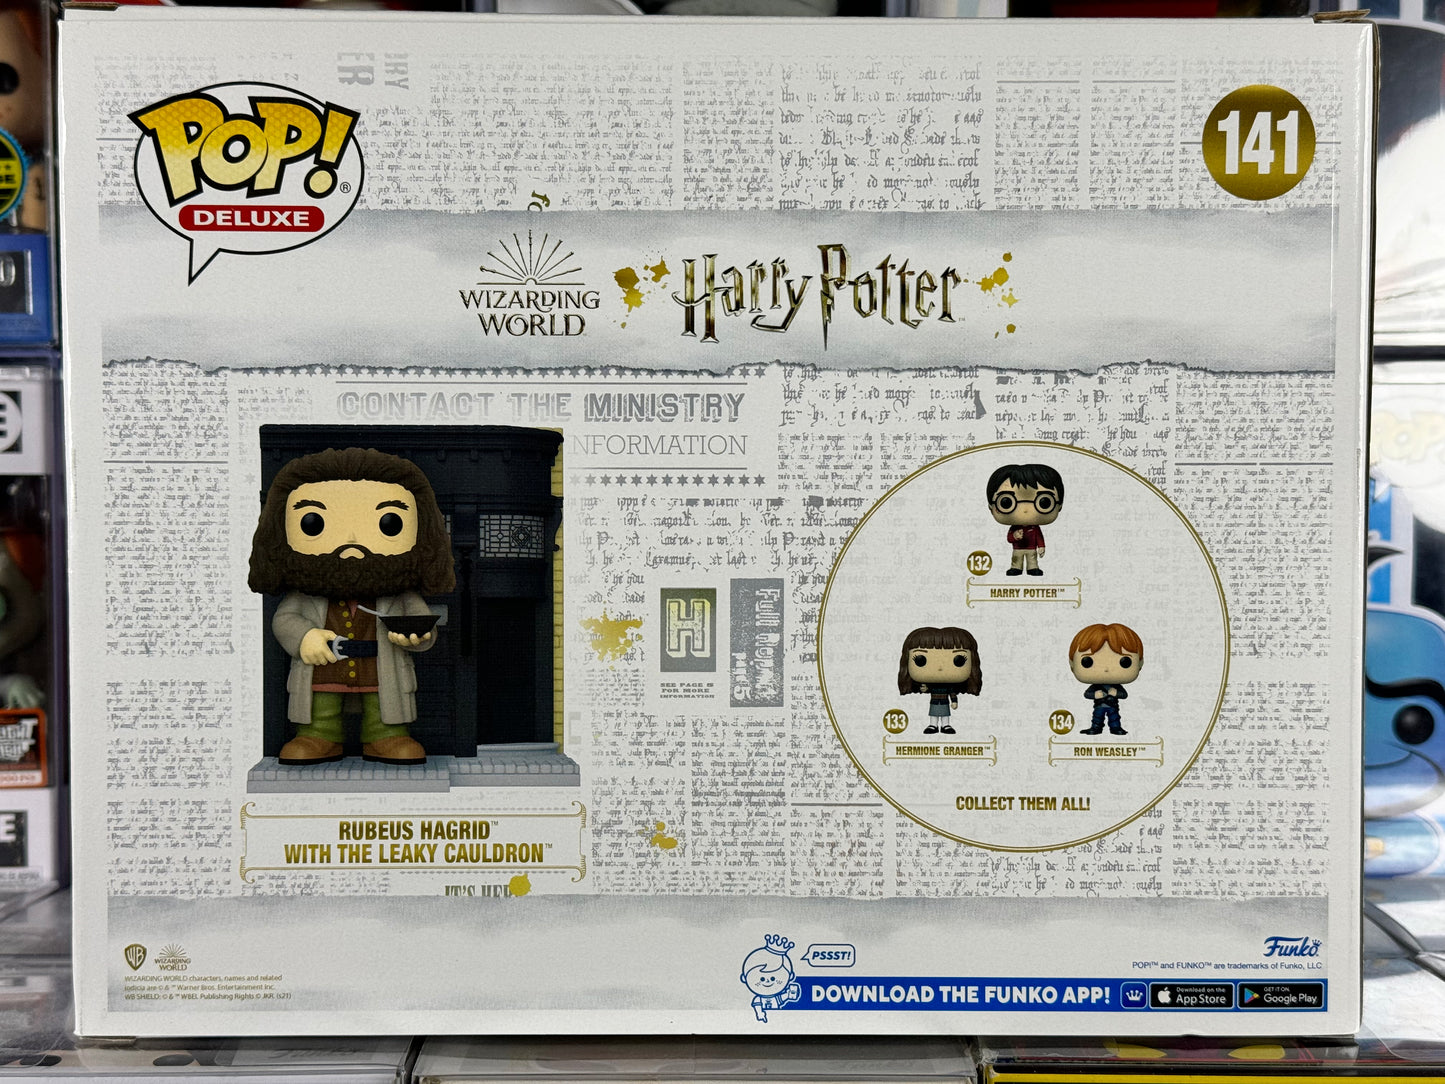 Wizarding Word of Harry Potter - Deluxe - Rubeus Hagrid With The Leaky Cauldron (141)